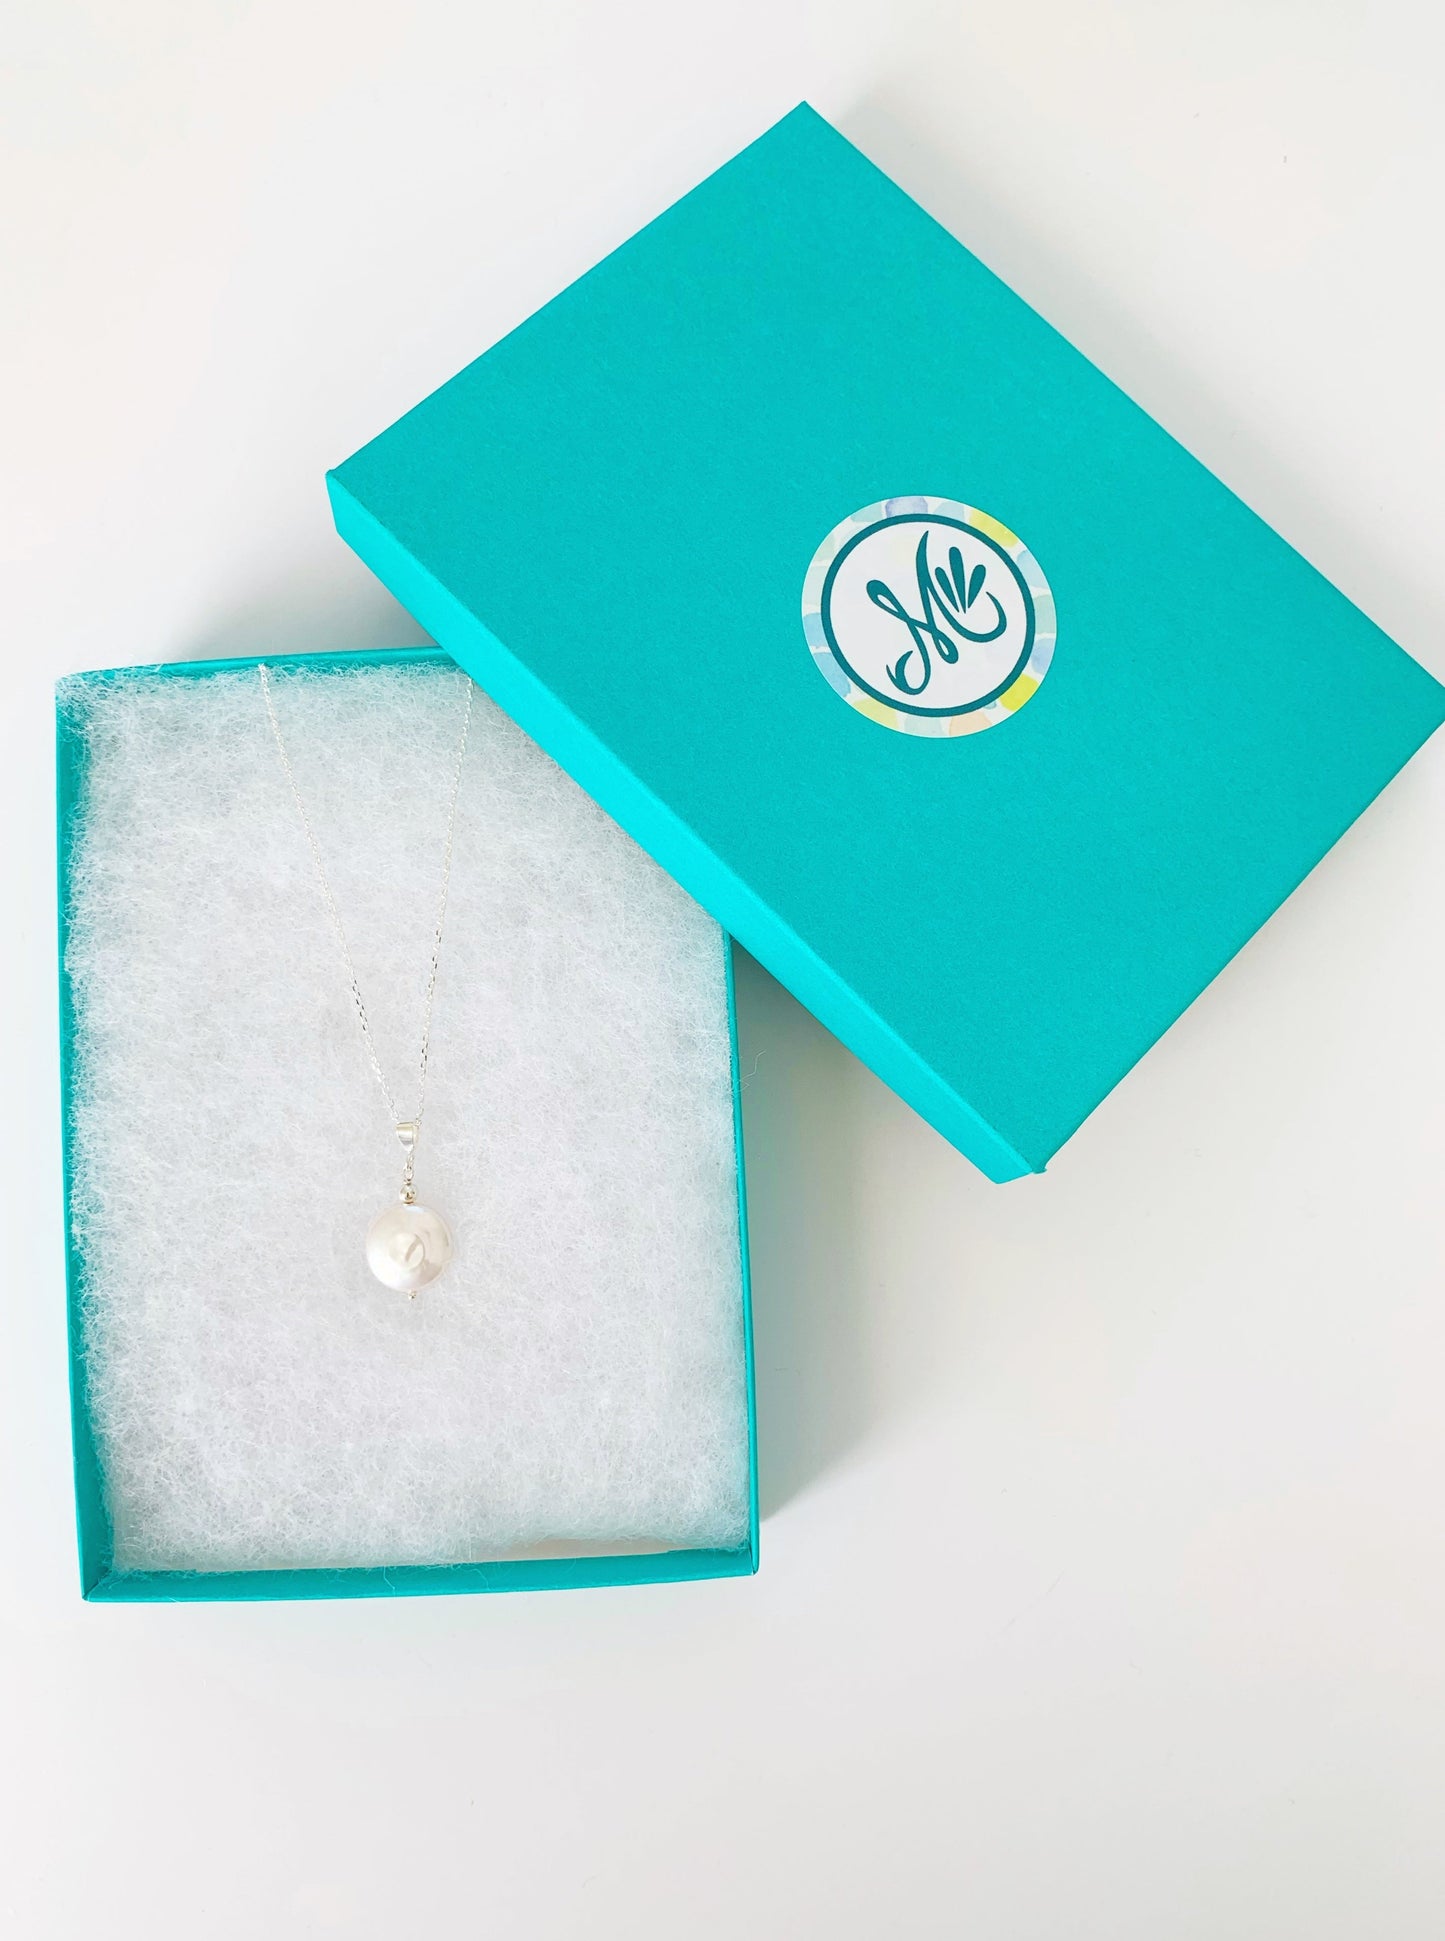 Newport Gala Large Coin Pearl necklace in sterling silver pictured here in a teal gift box on a white surface